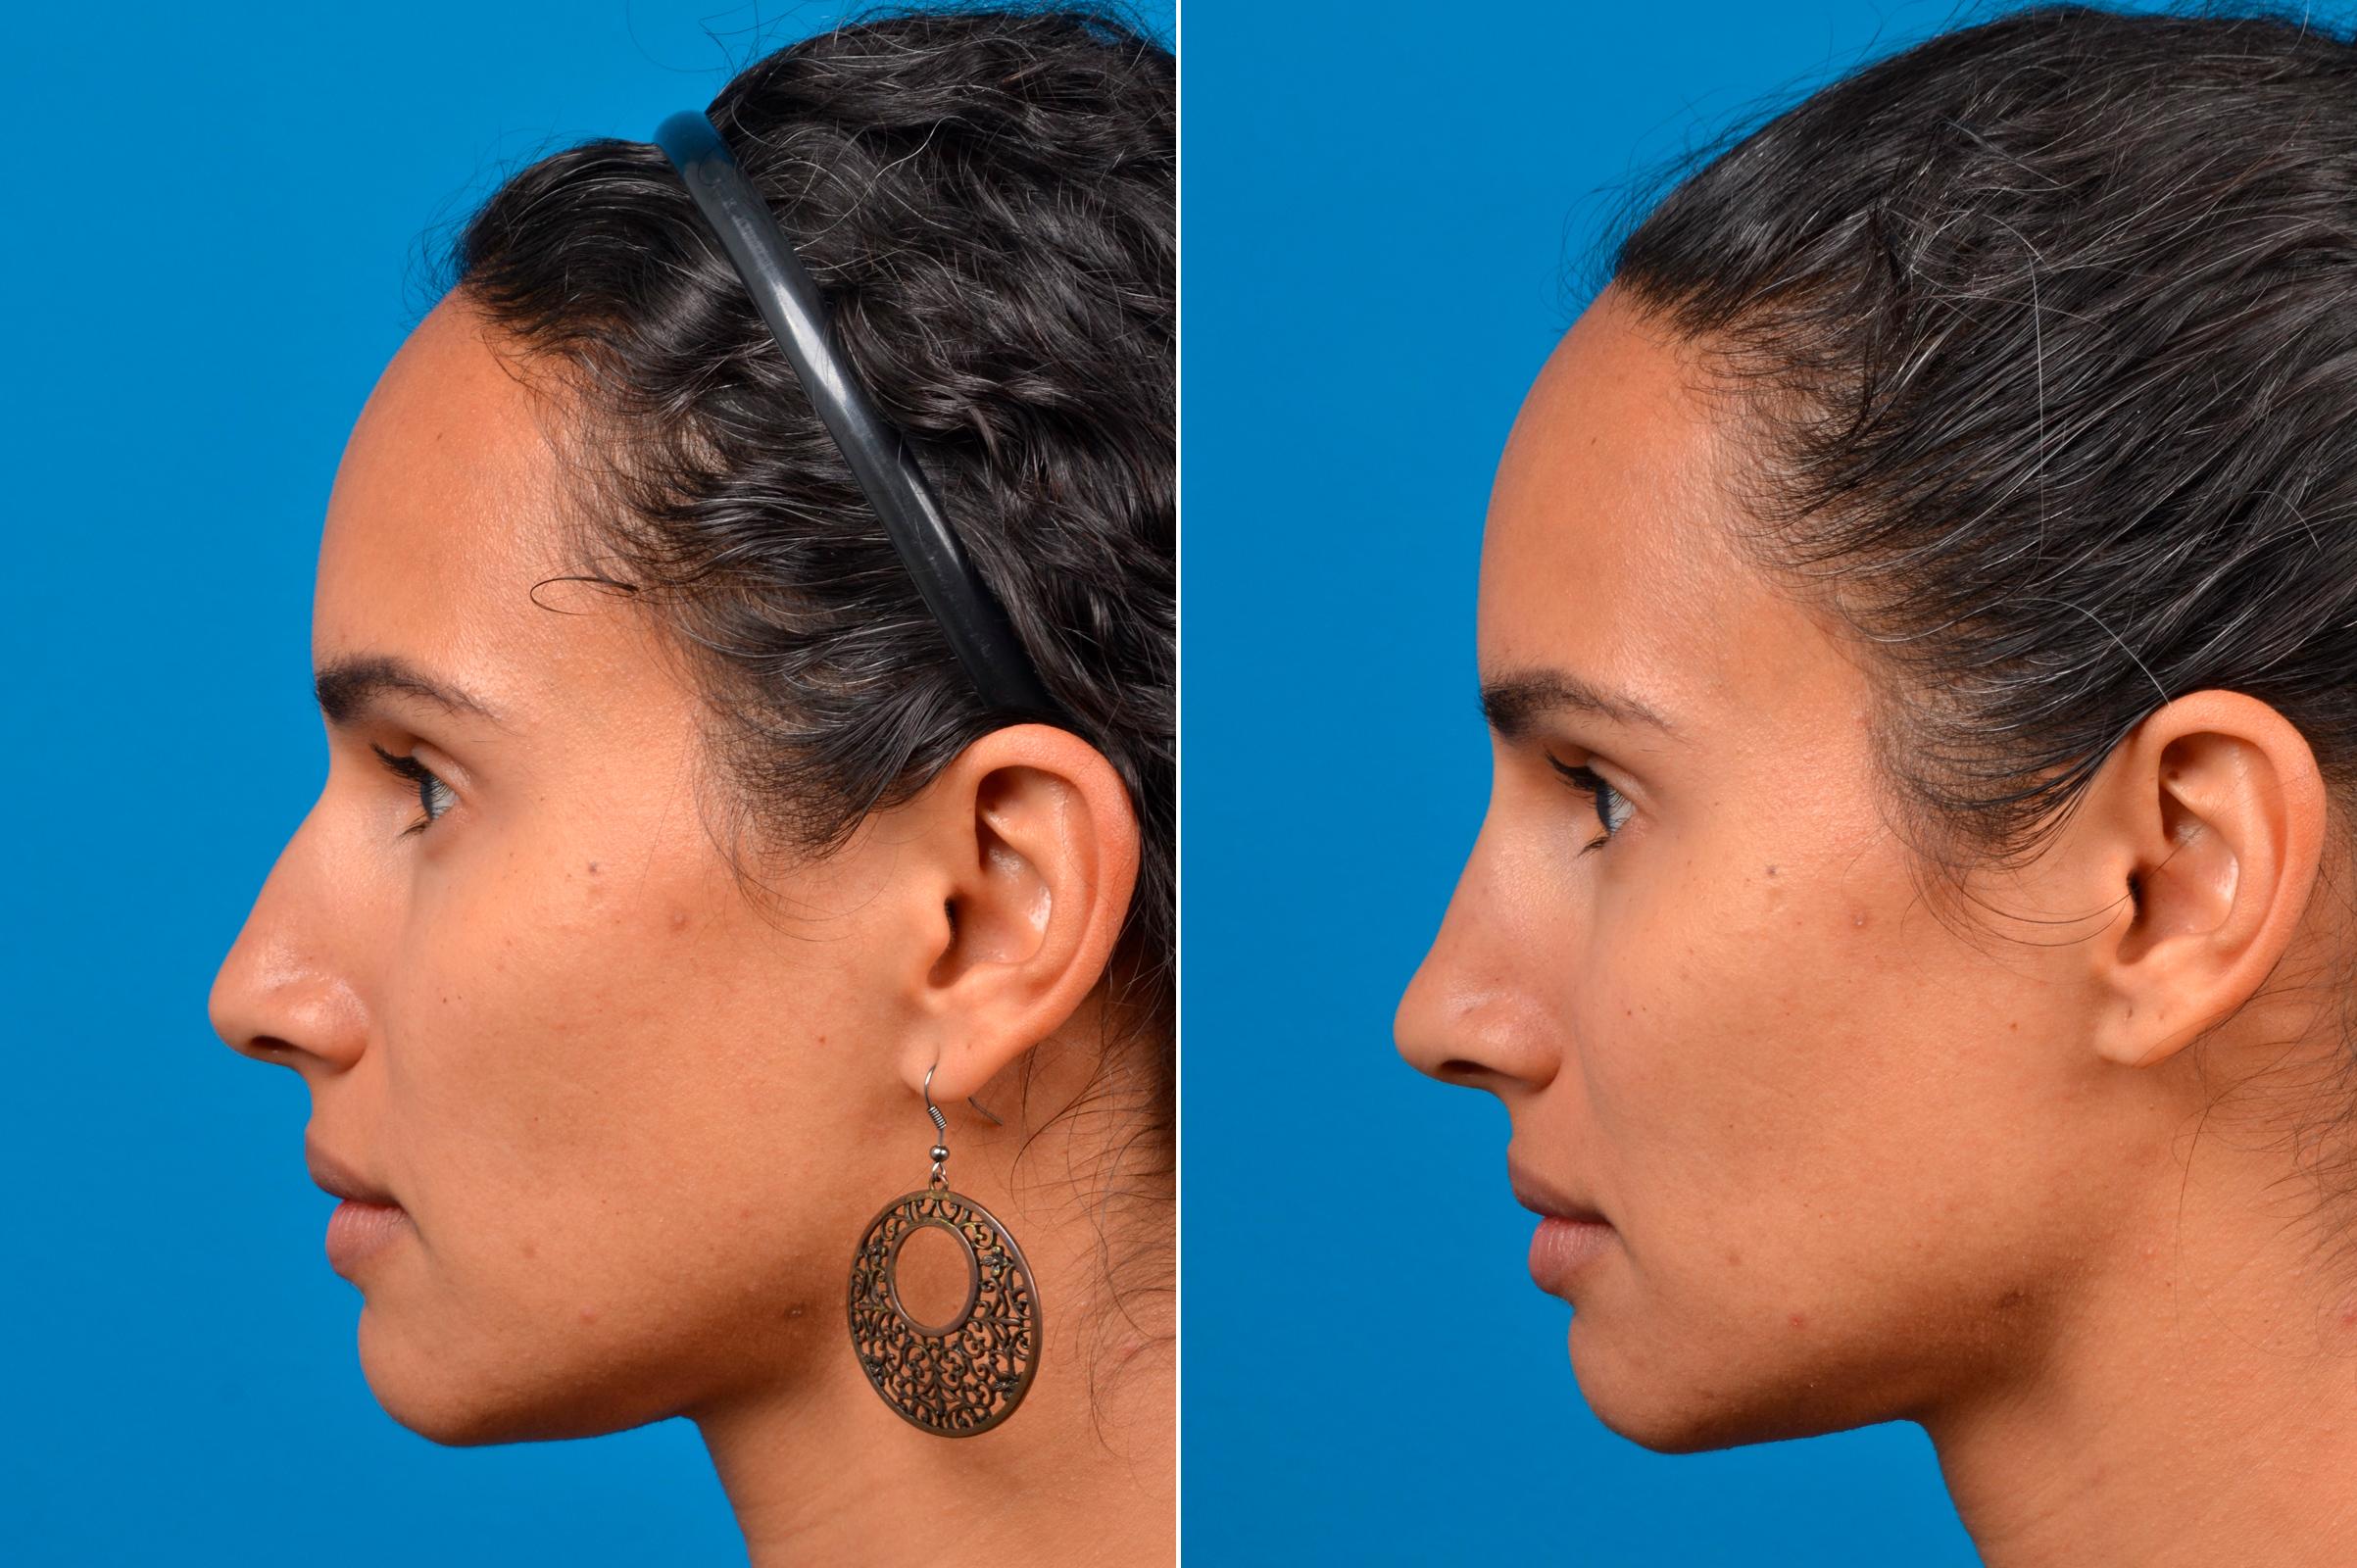 liquid rhinoplasty before and after